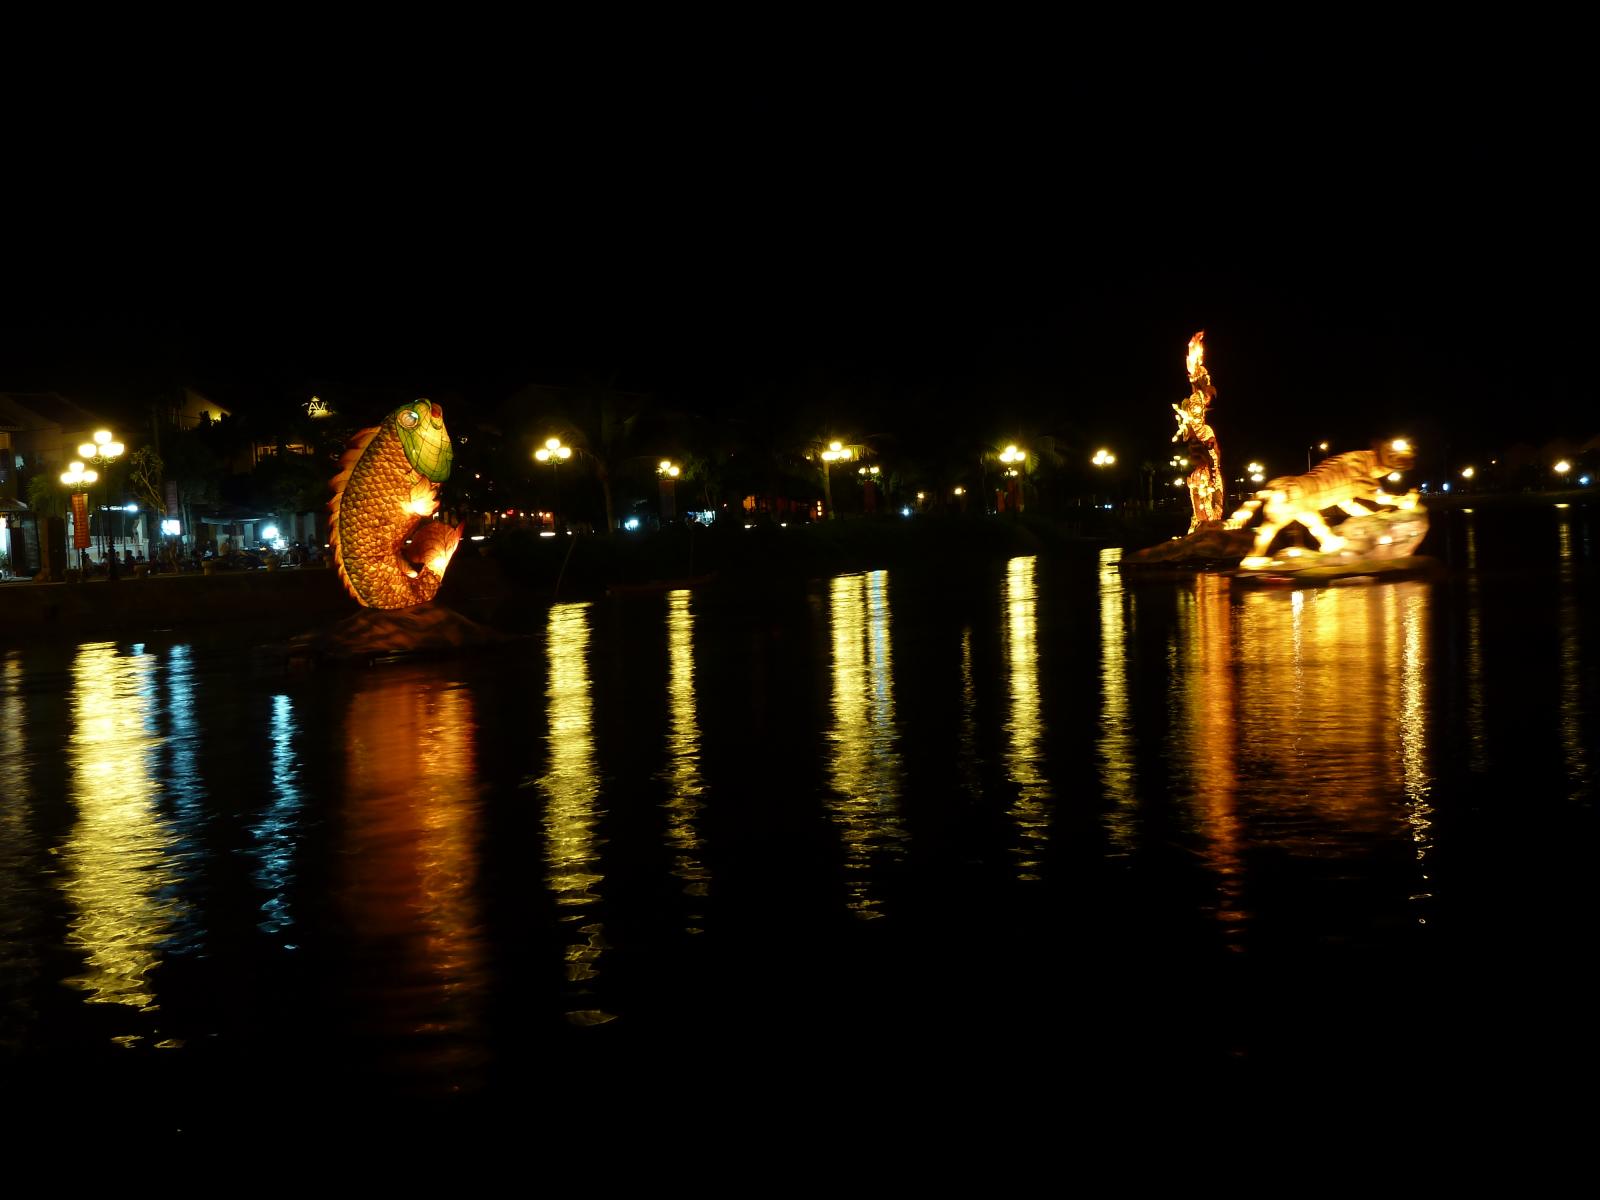 some boats in the water near lights and trees